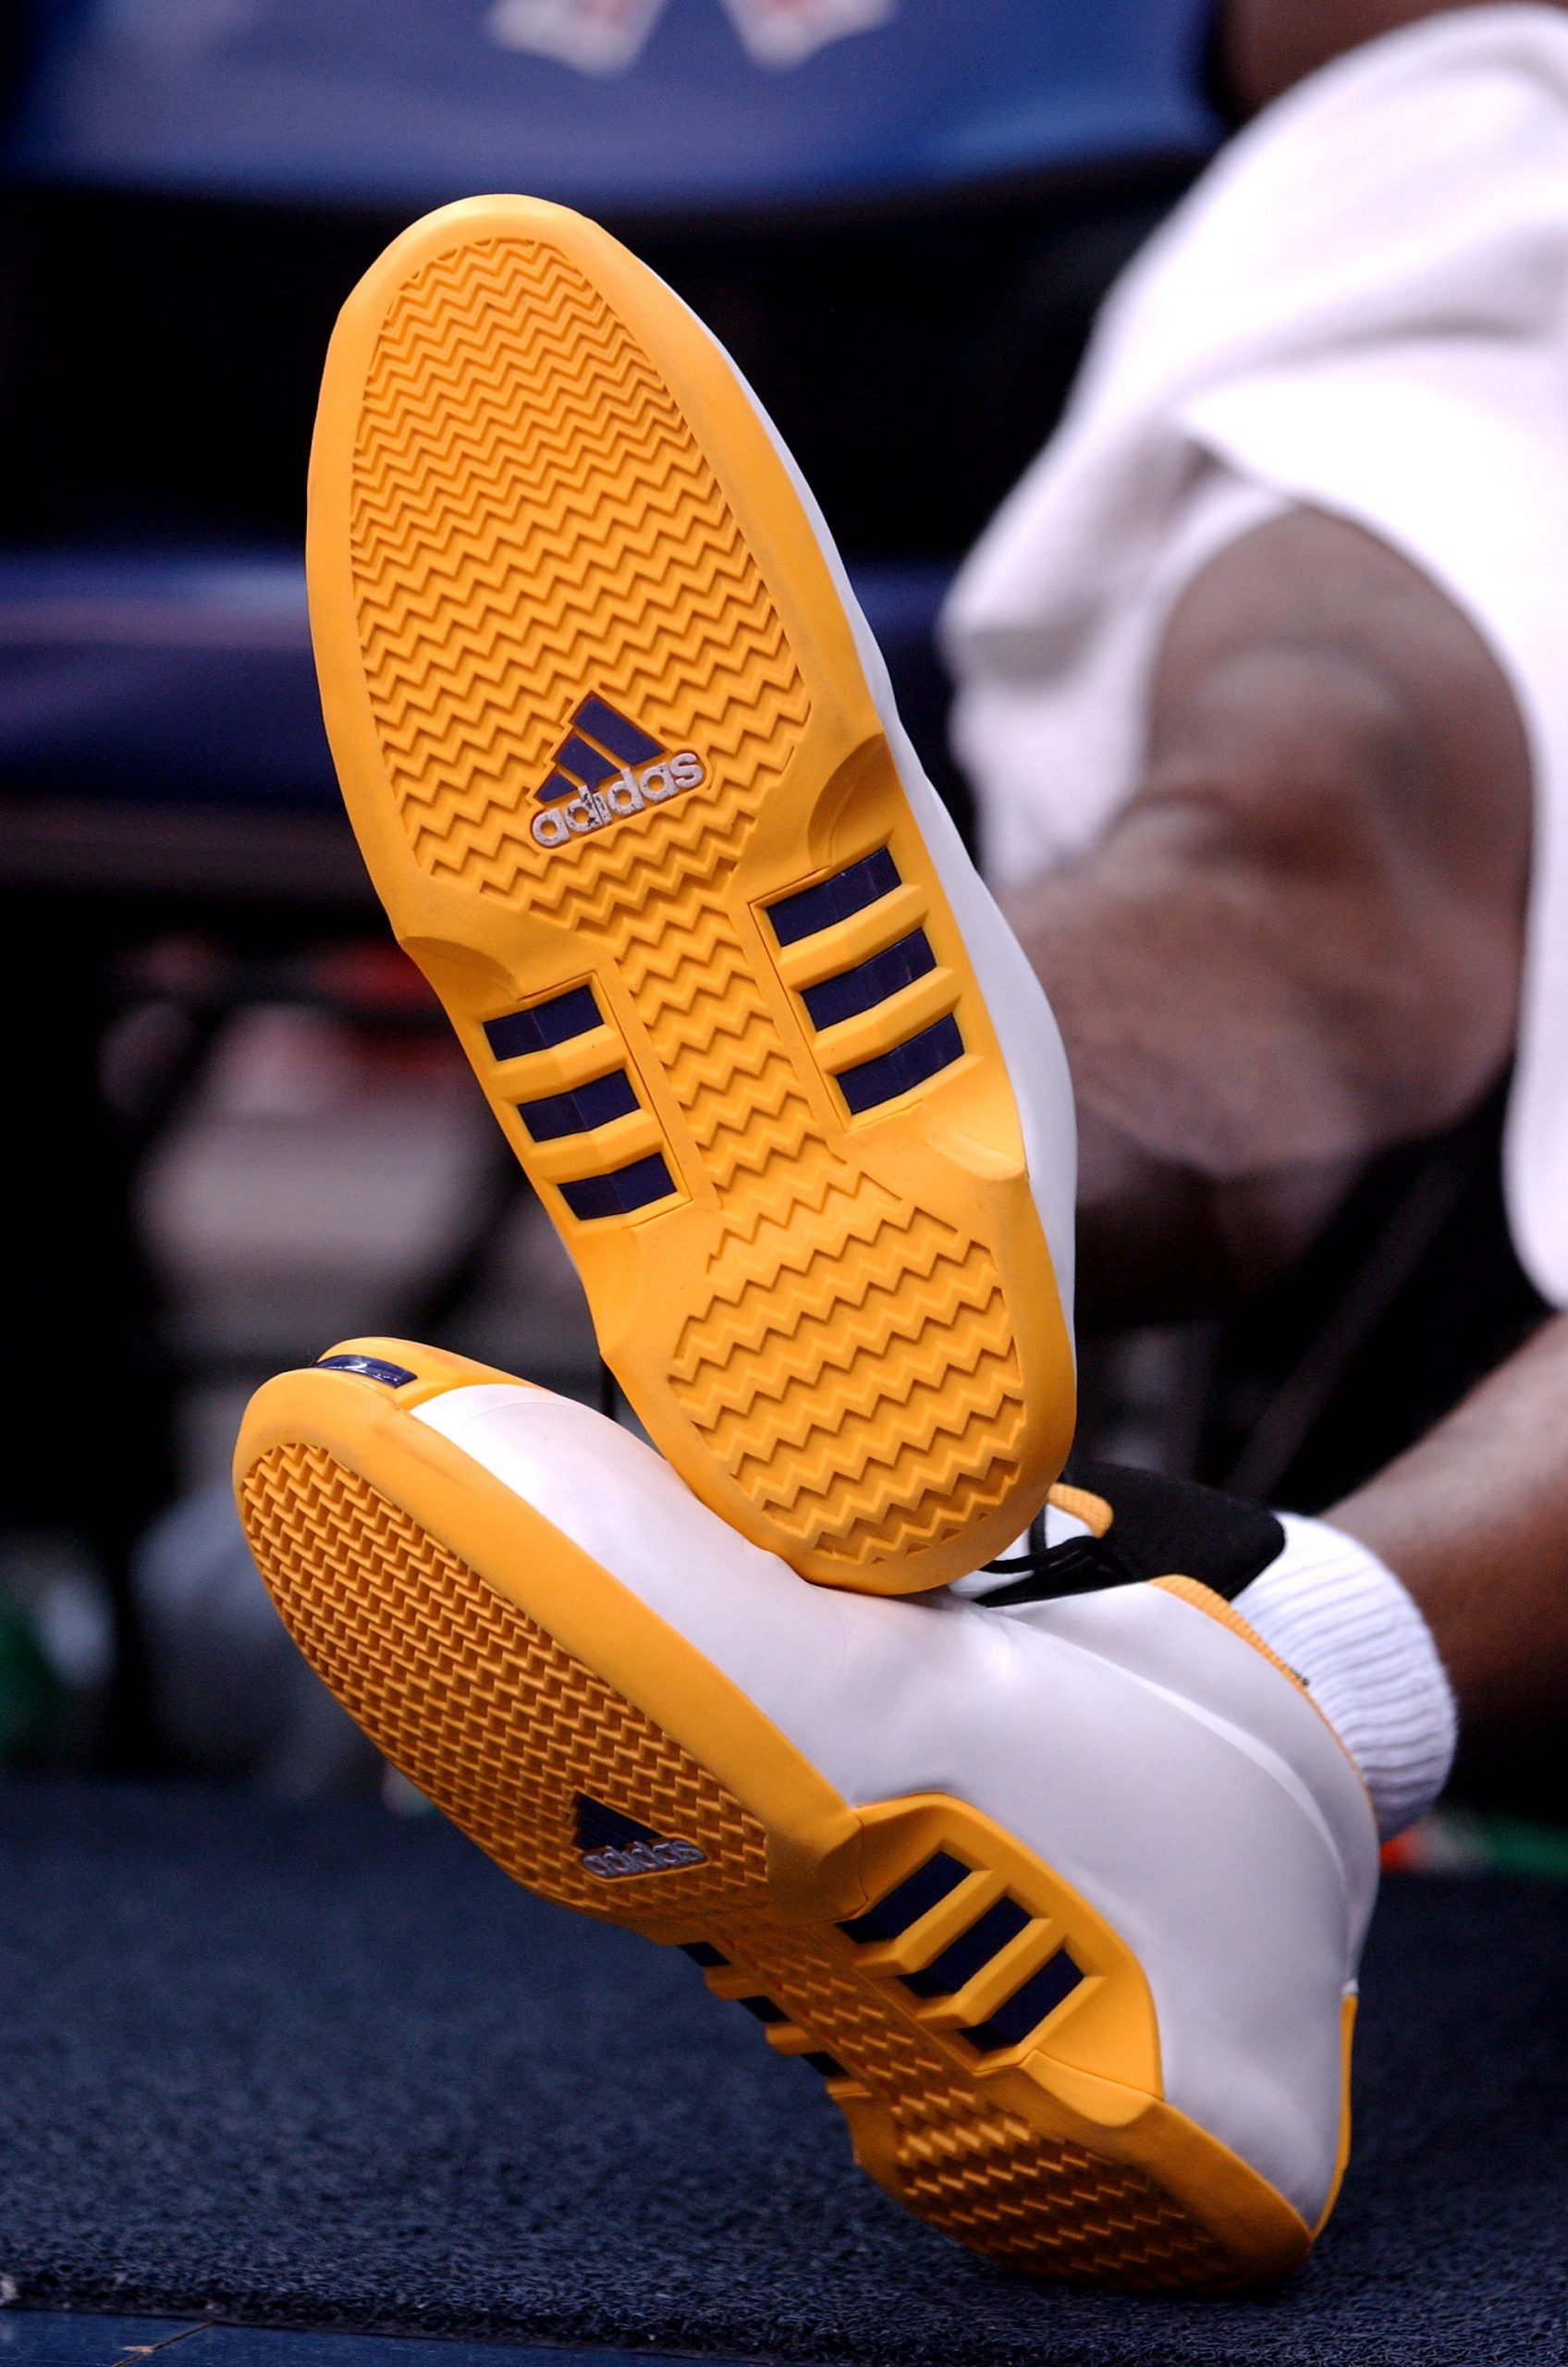 Kobe Bryant shoes: A look at what might be Kobe's final two Nike shoes